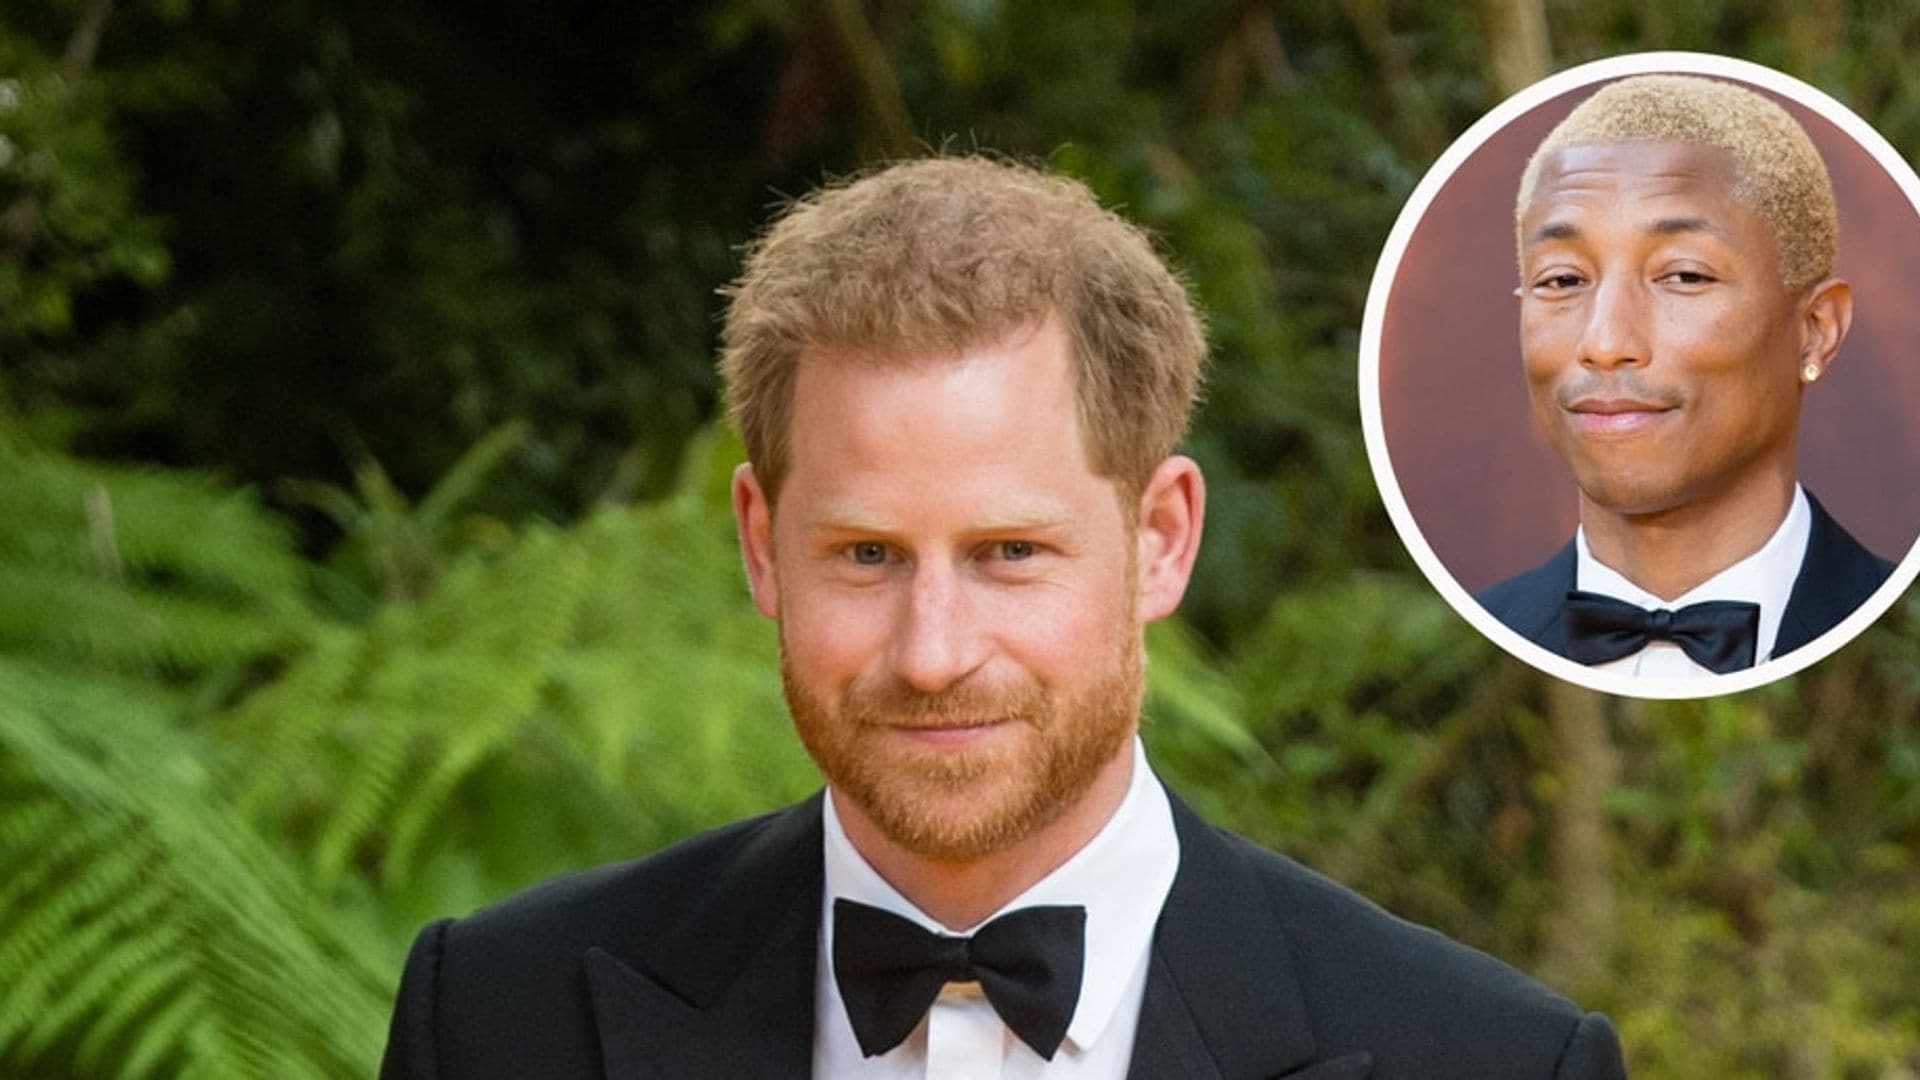 Prince Harry at The Lion King premiere